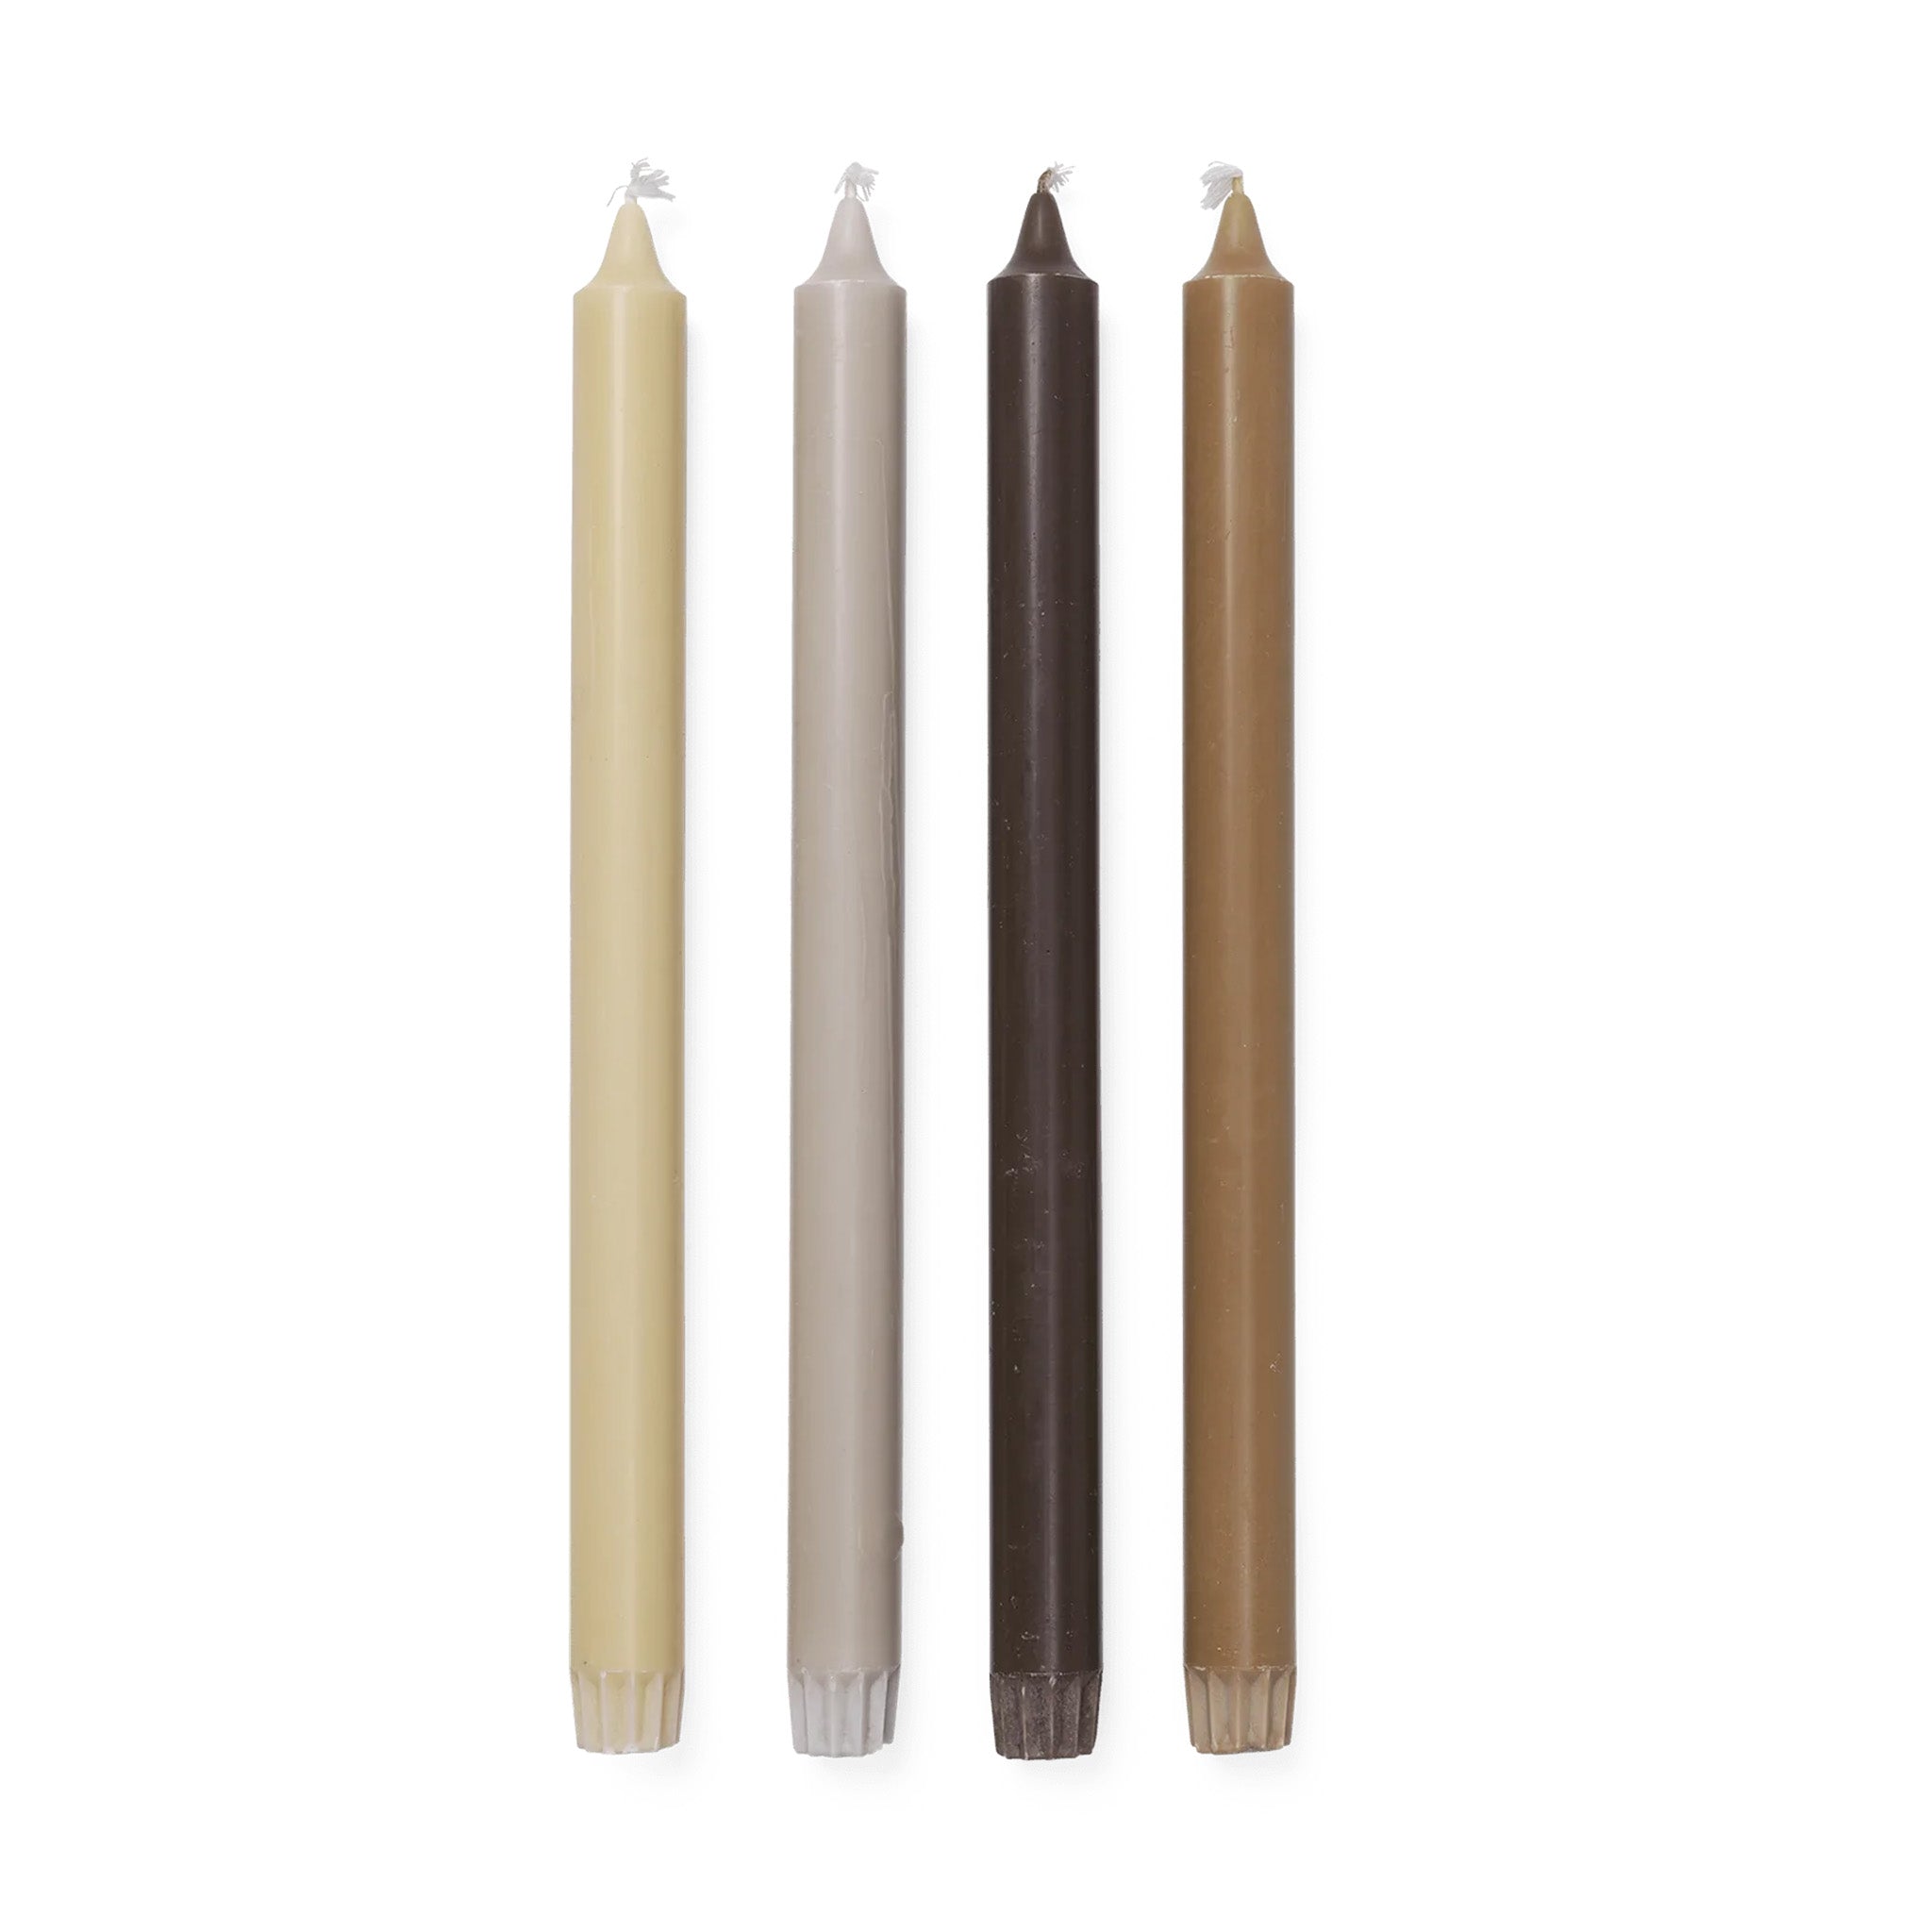 Set of 4 Pure Candles - Calm Blend By Ferm Living